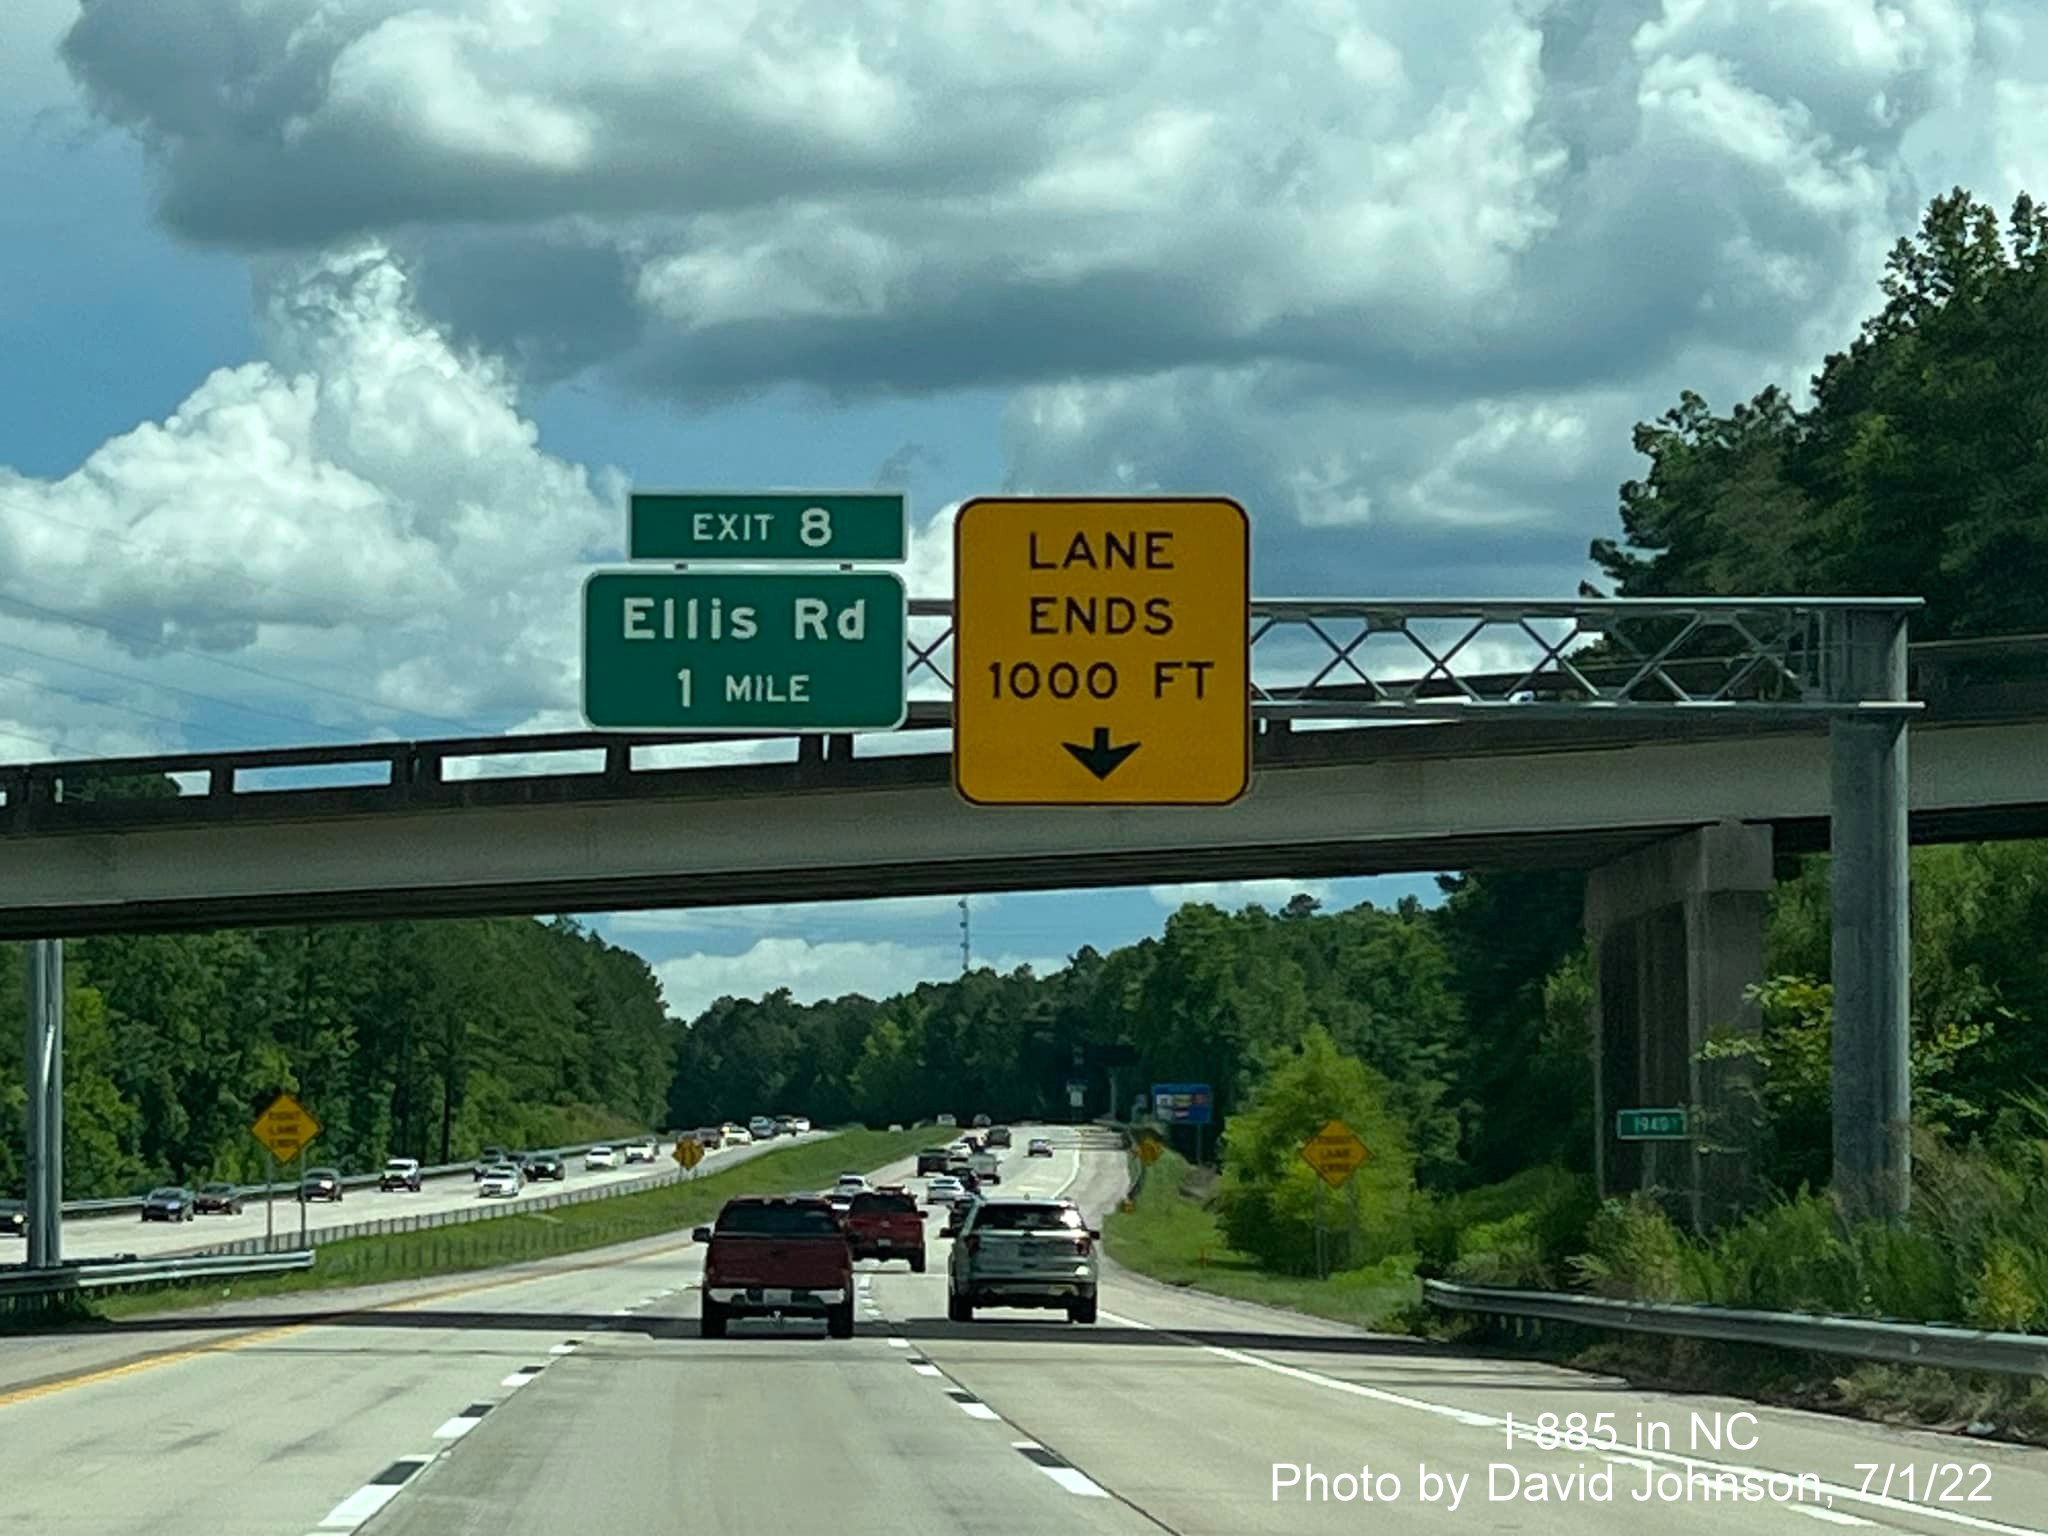 Image of overhead sign for Ellis Road exit on I-885 South/Durham Freeway, by David Johnson July 2022